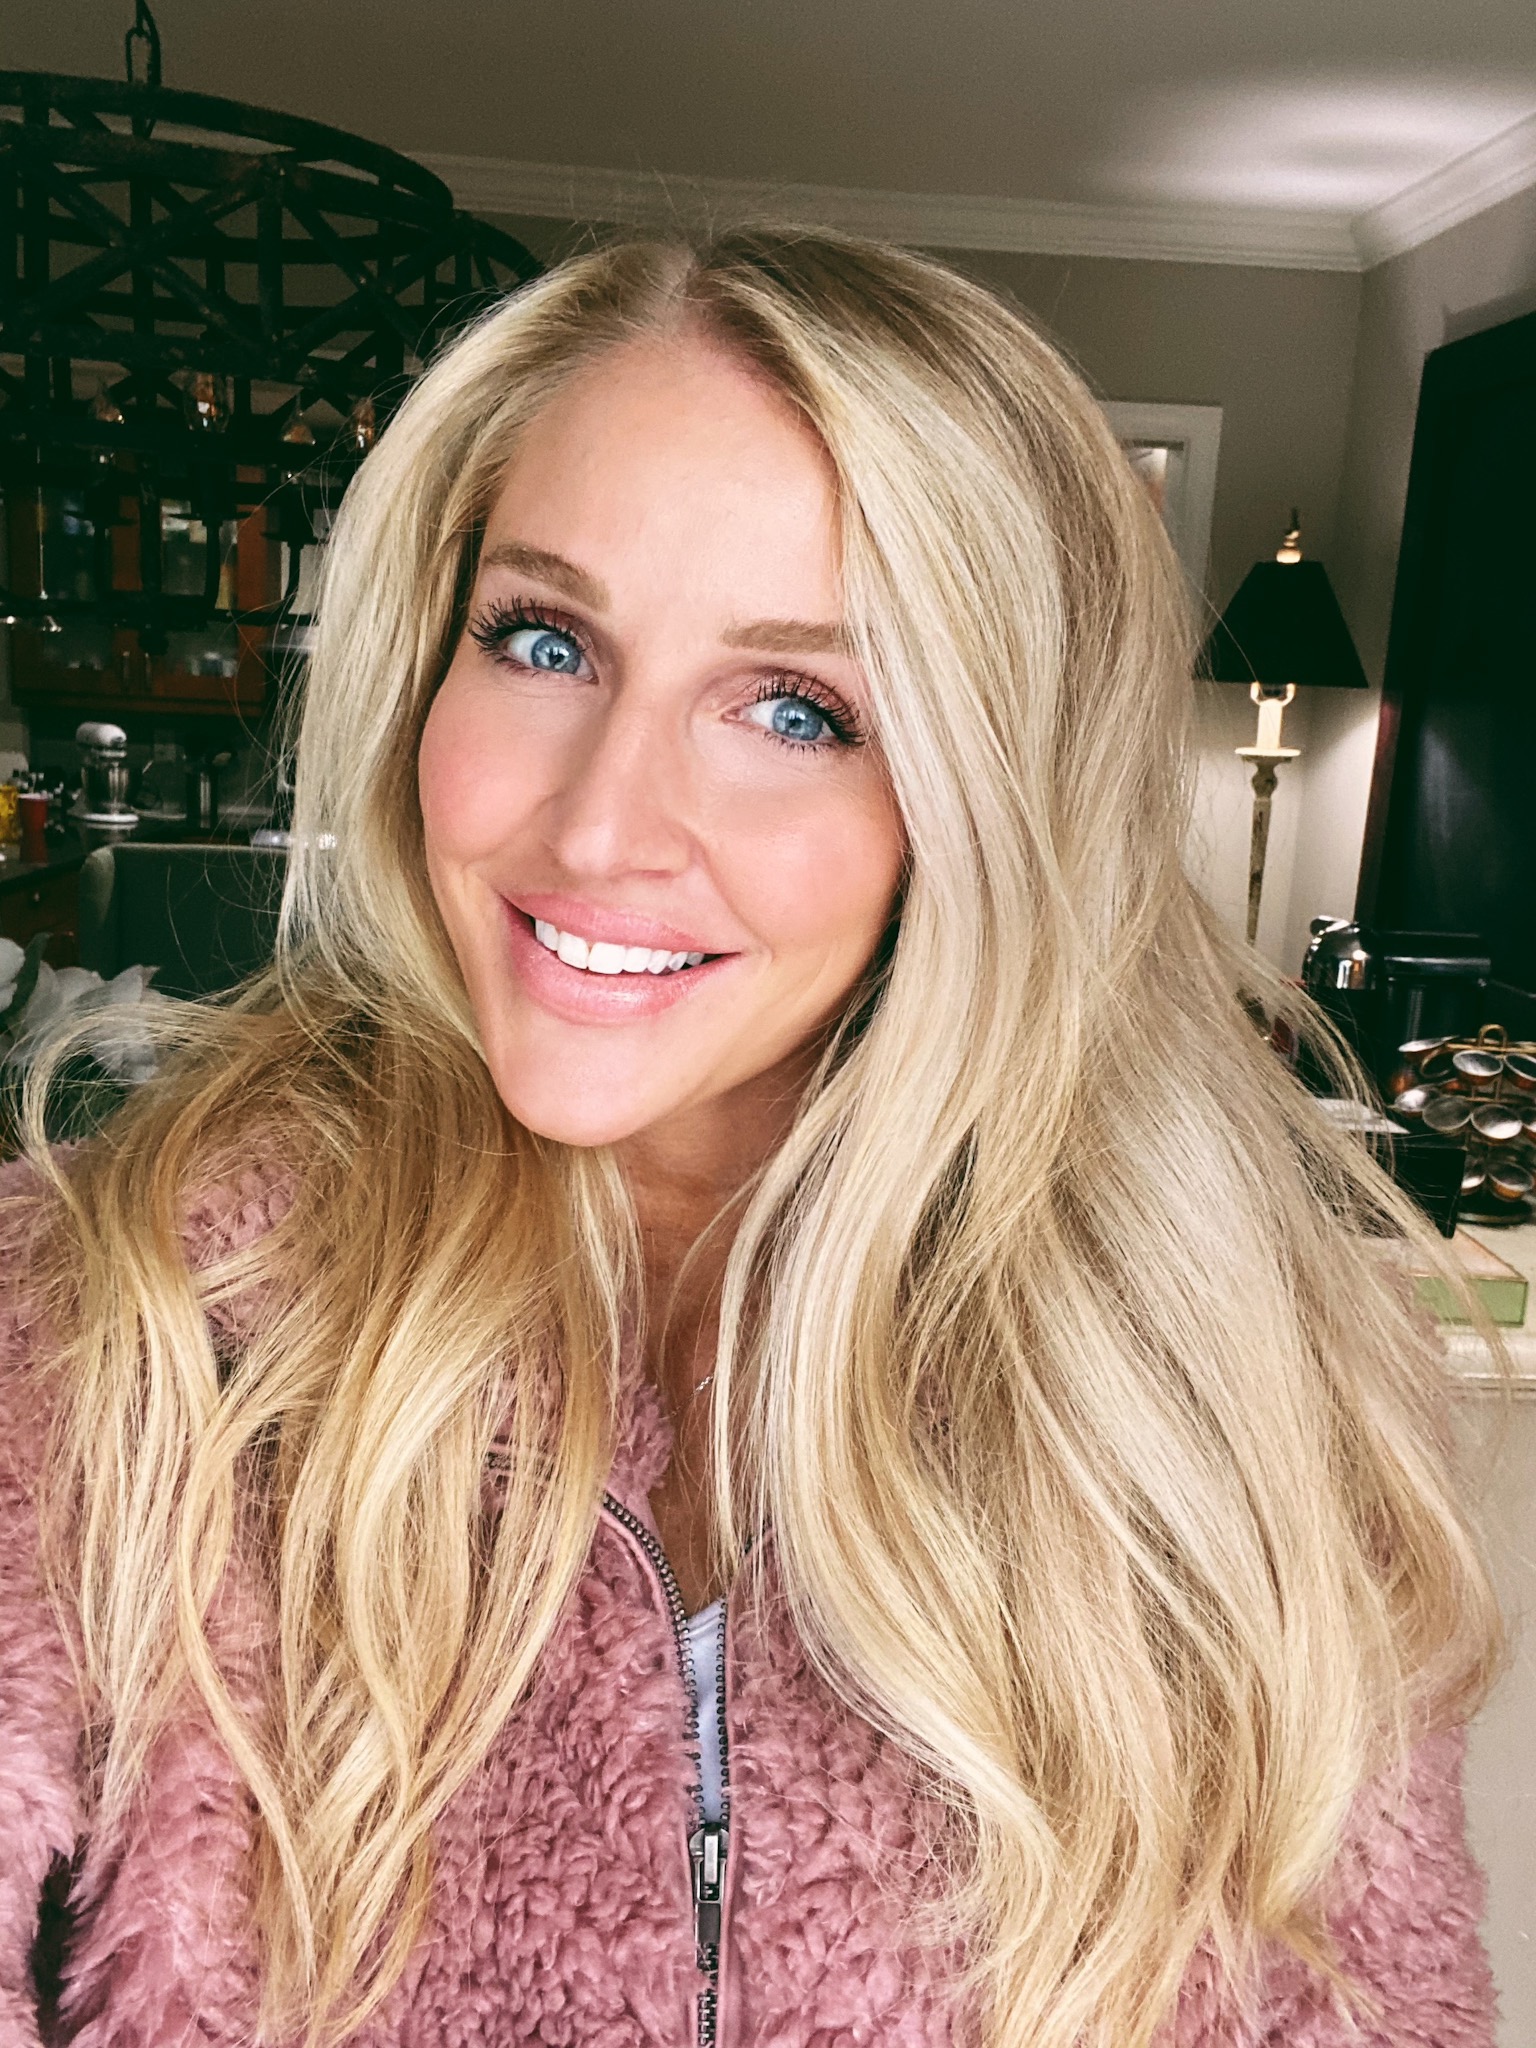 Looking for the perfect dewy makeup tutorial? Popular Atlanta Blogger Happily Hughes is sharing her favorite skincare and makeup favorite to achieve a dewy makeup look here!